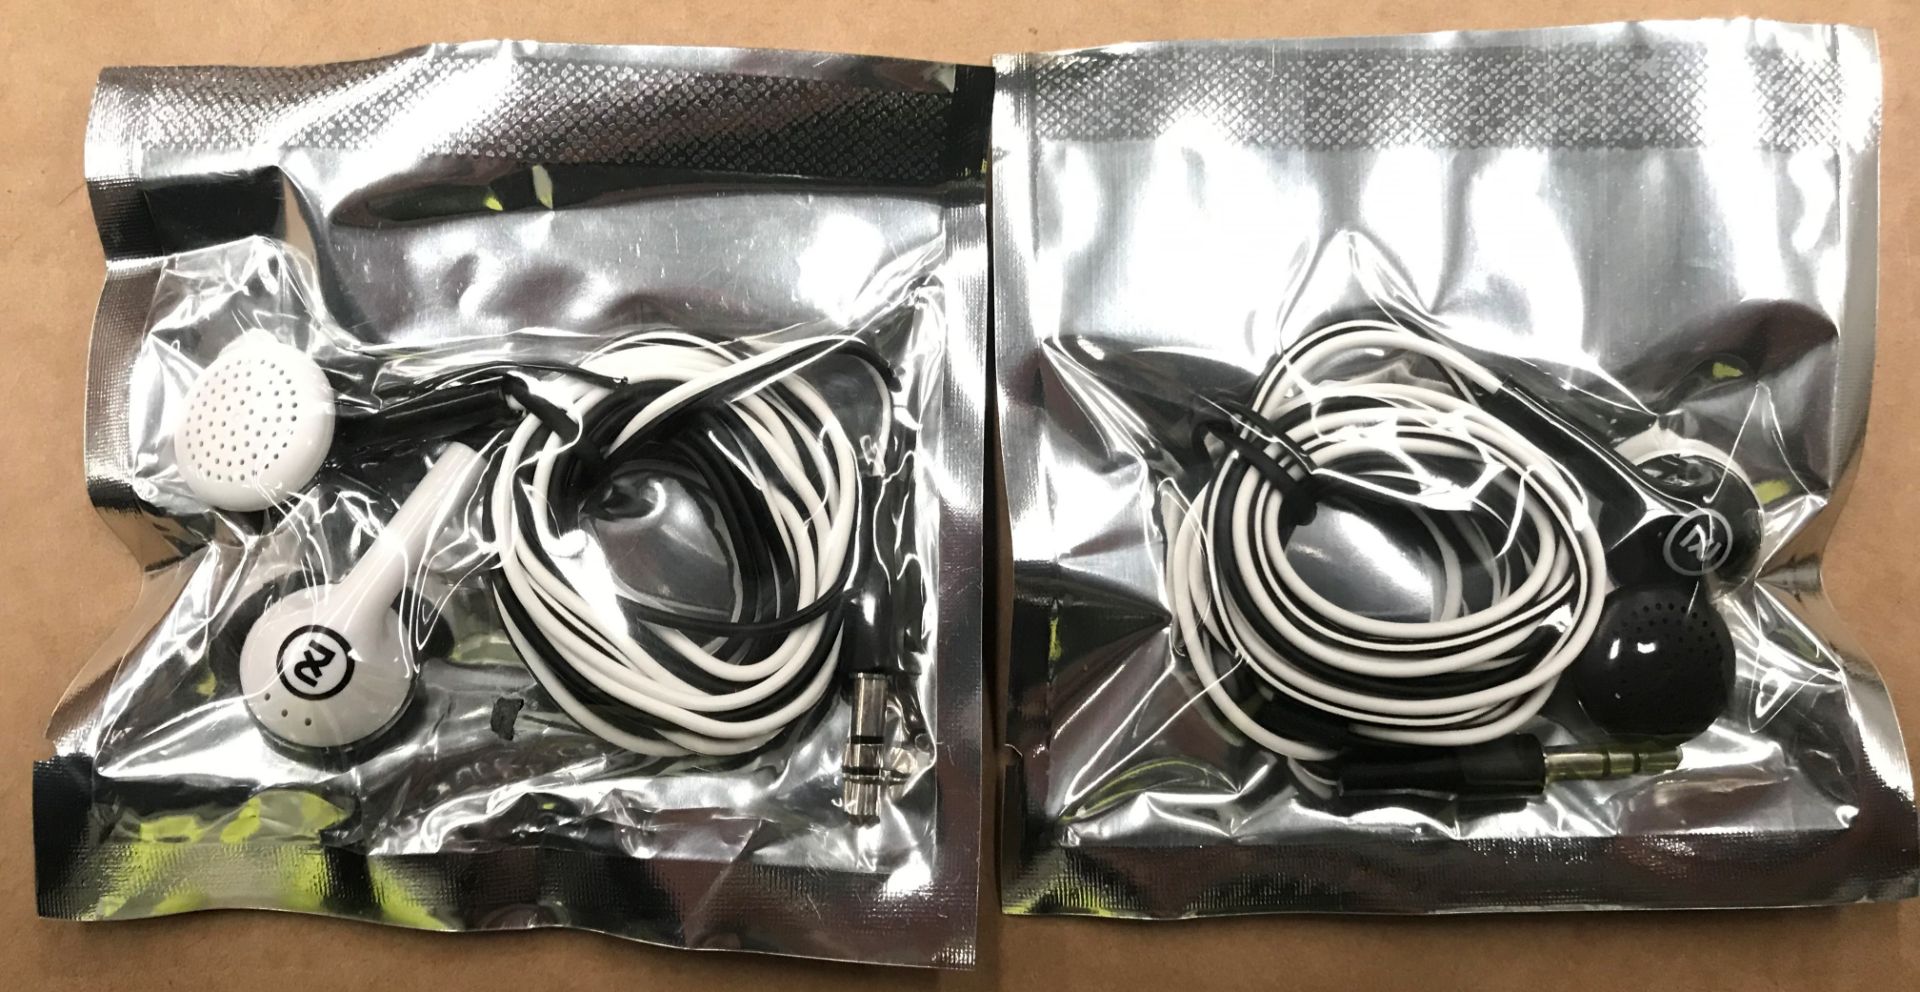 500 x 2XL Offset Earbuds/headphones by Skullcandy (20 inner bags) - black and white